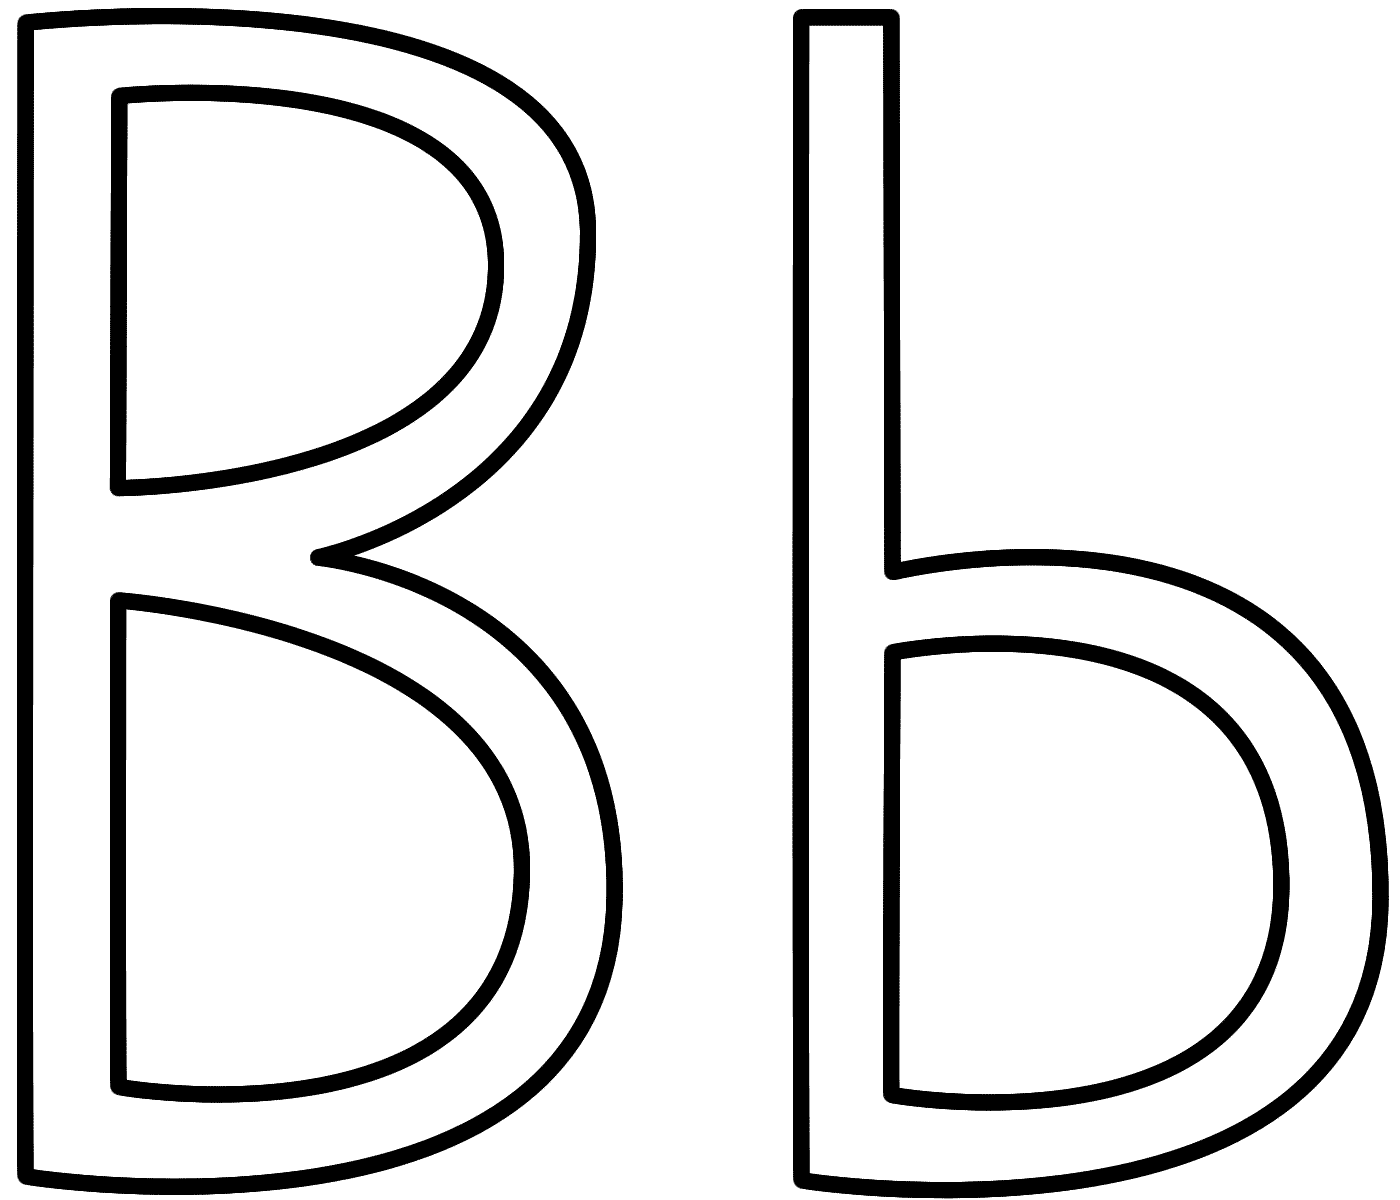 b coloring page a z alphabet coloring pages download and print for free page coloring b 